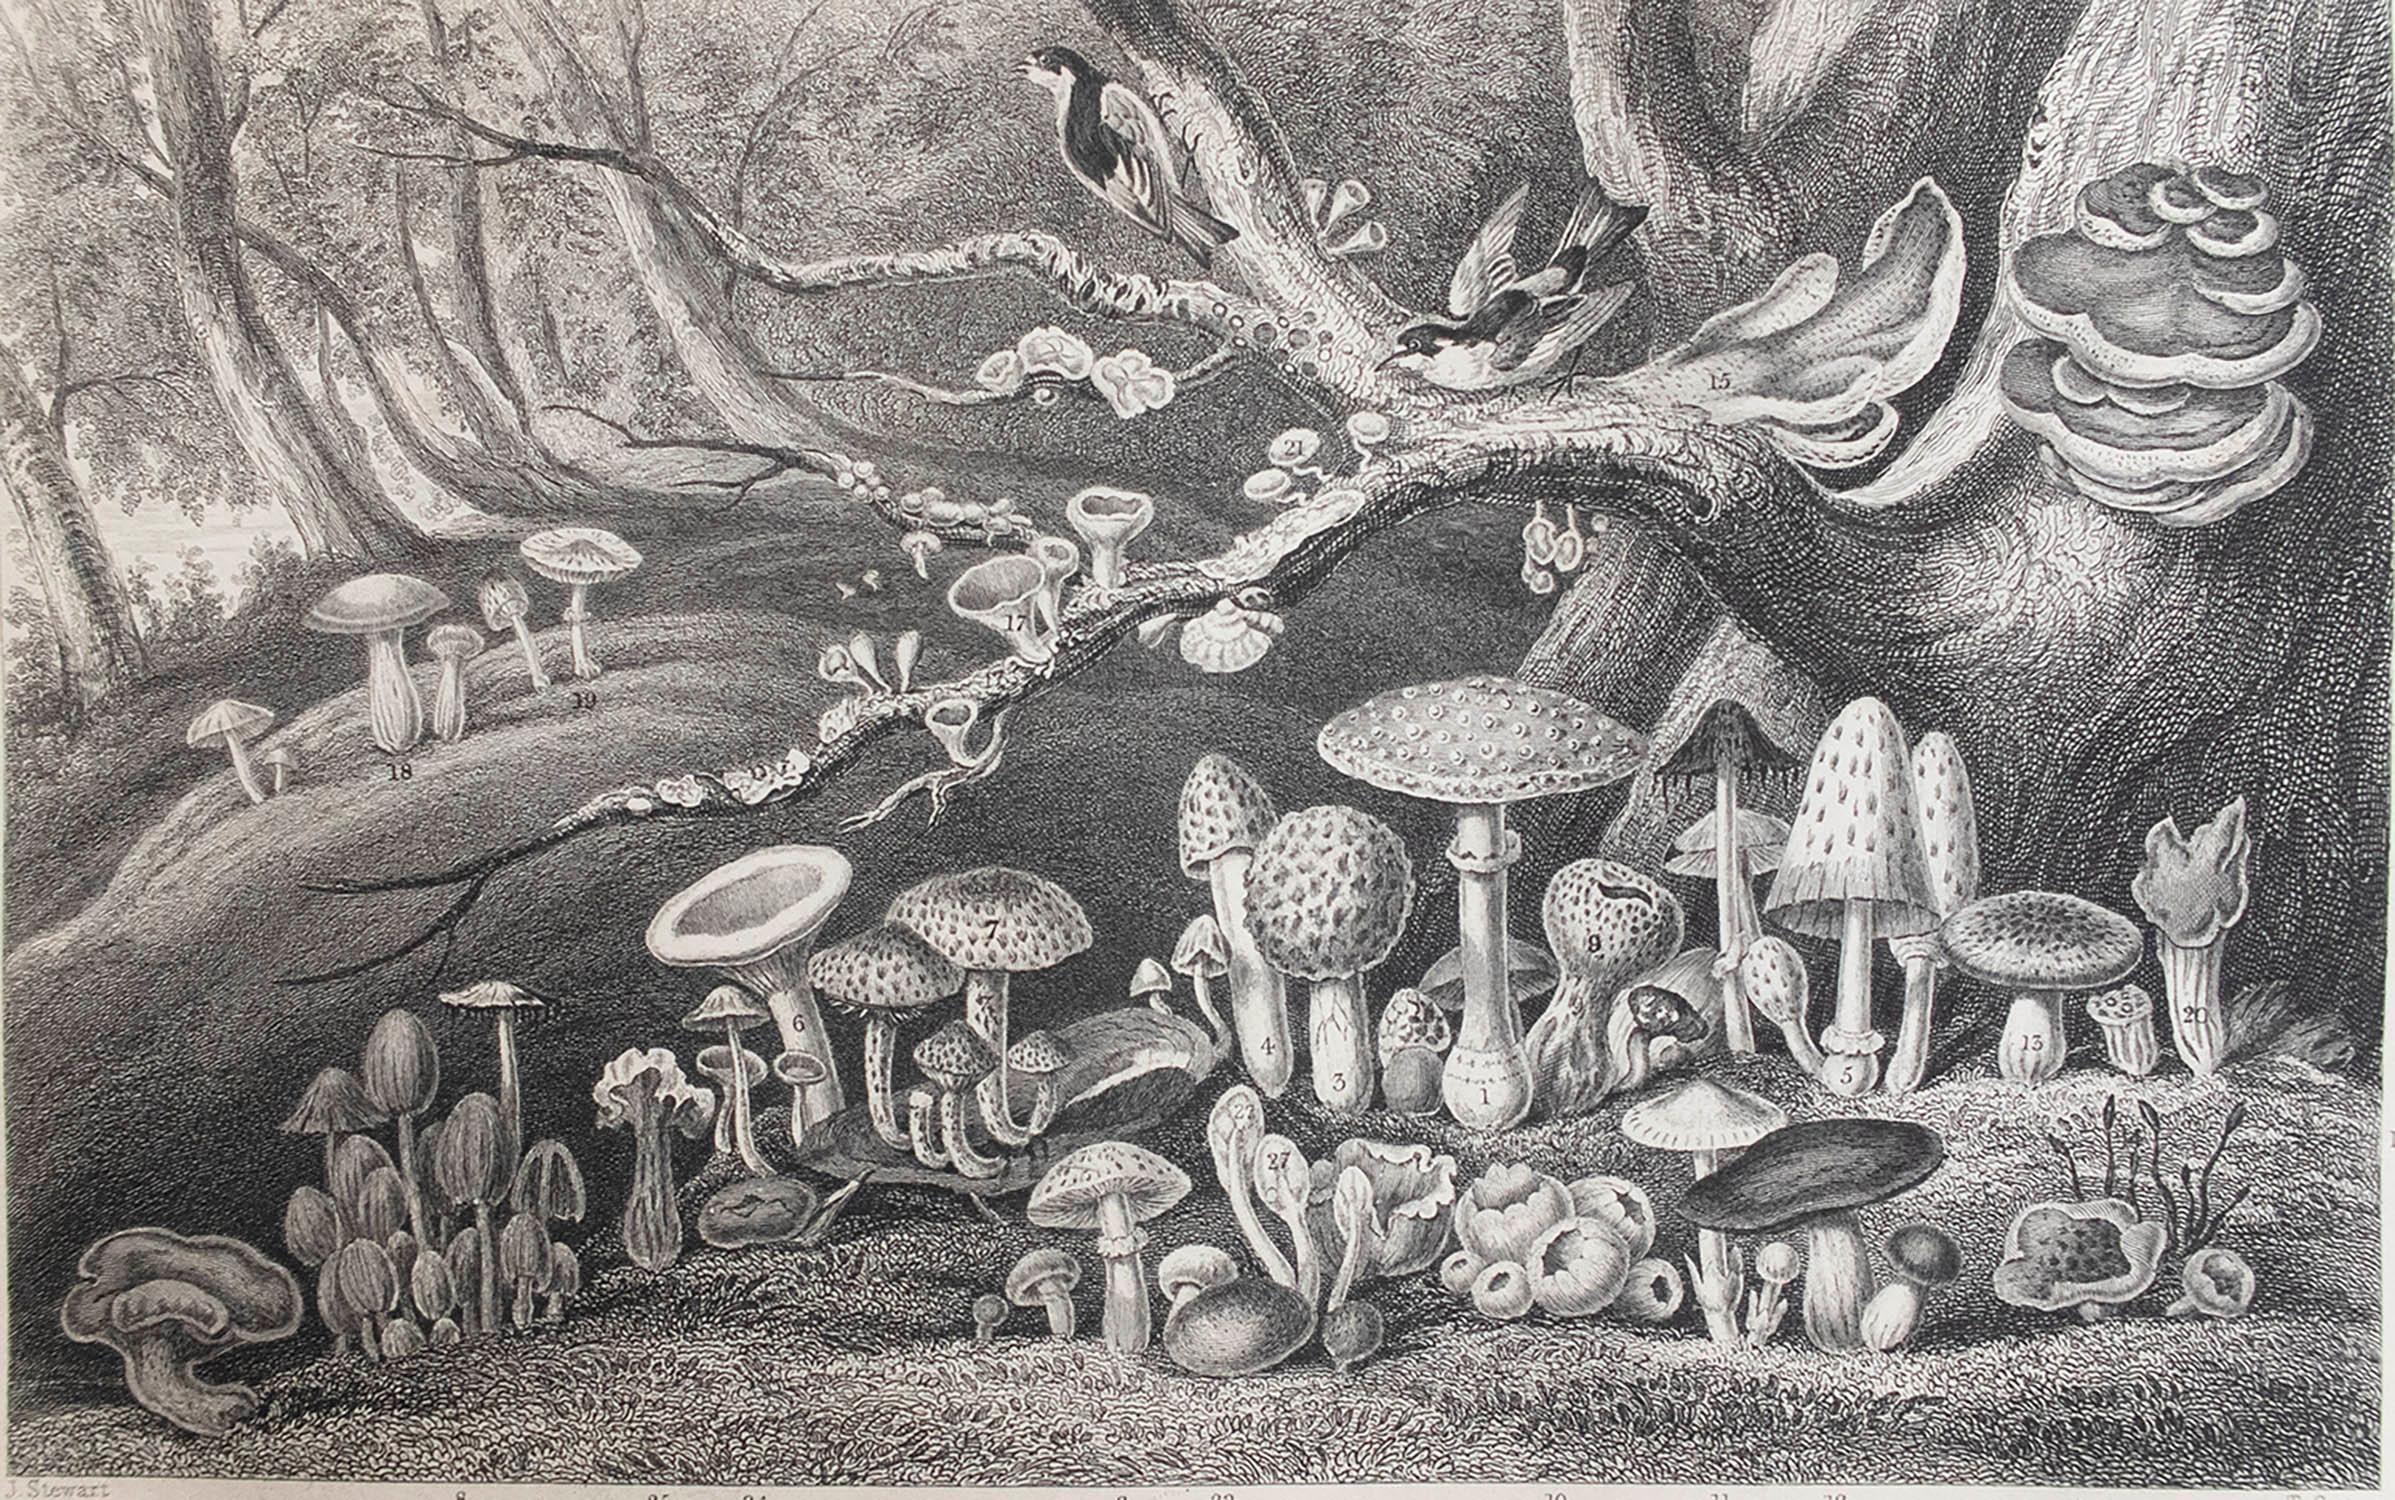 Great image of mushrooms

Steel engraving 

Published by Blackie. C.1870

Unframed.

Free shipping.